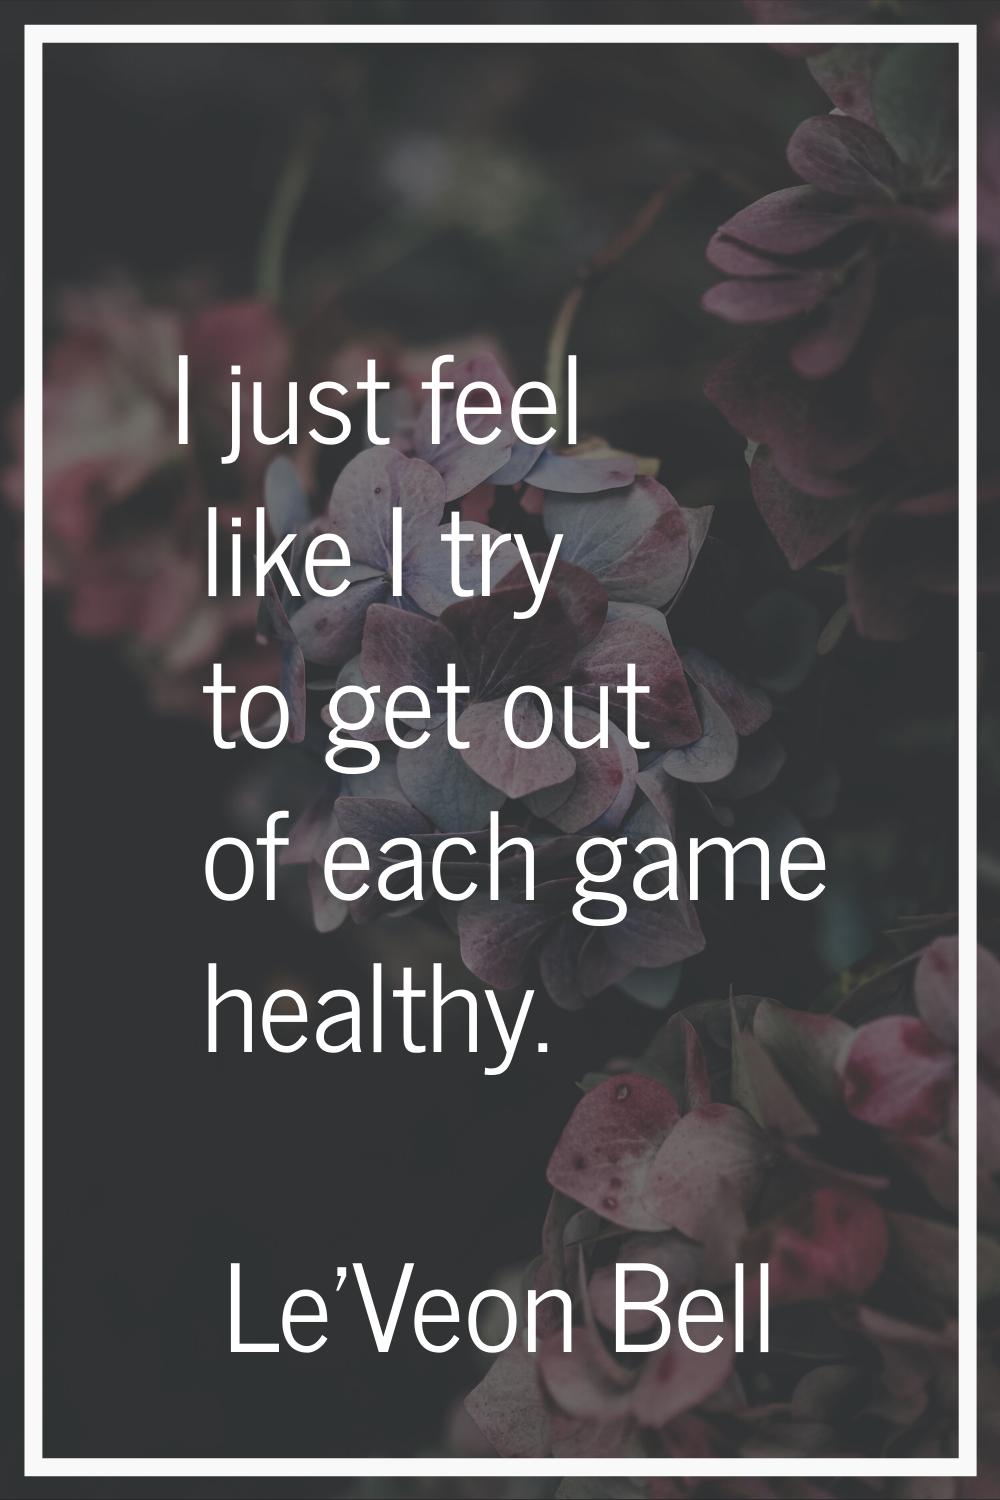 I just feel like I try to get out of each game healthy.